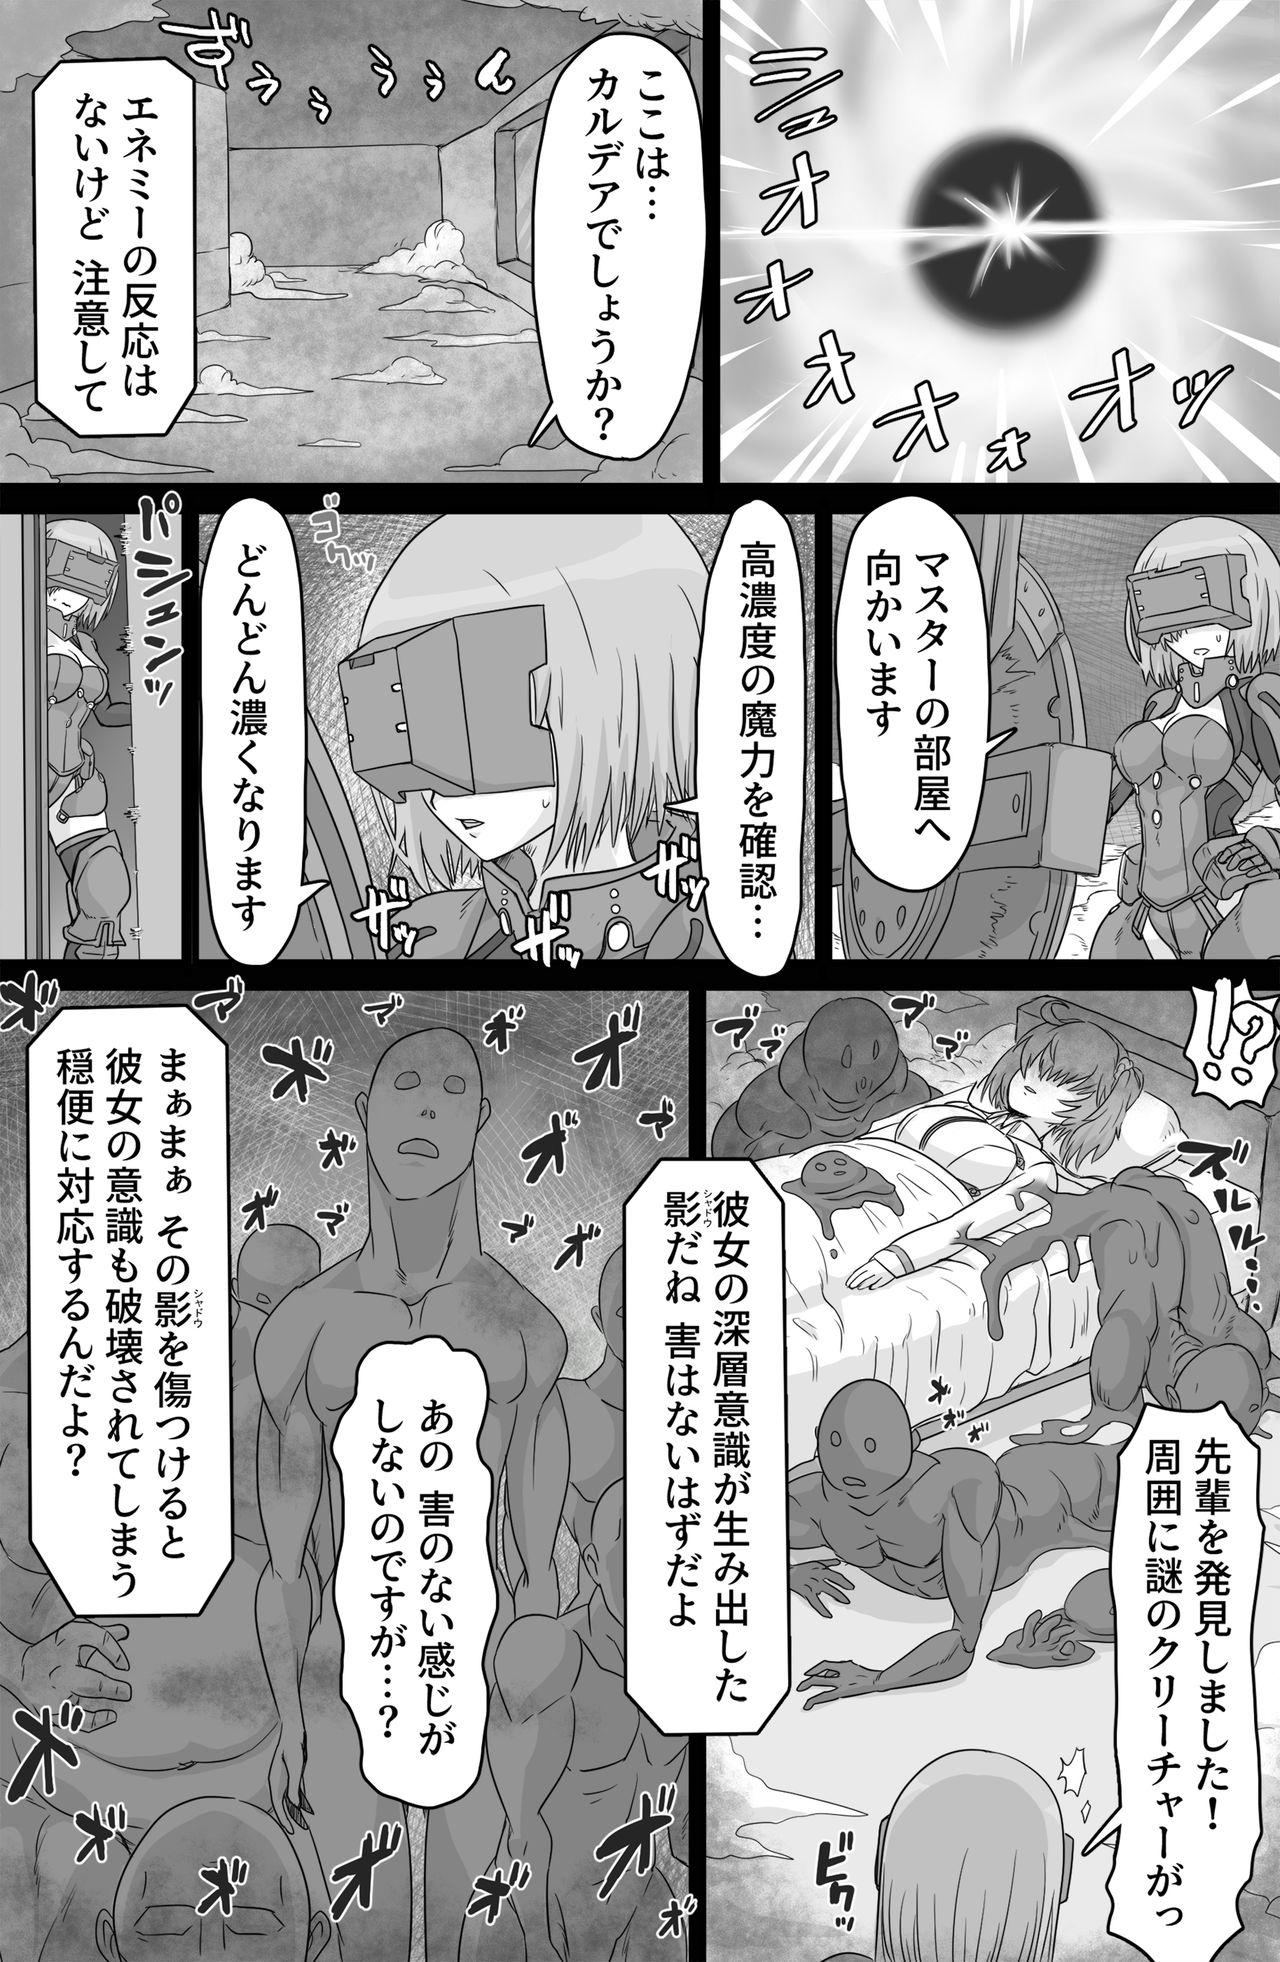 Caiu Na Net Shadow Bind - Fate grand order Ex Girlfriends - Page 3